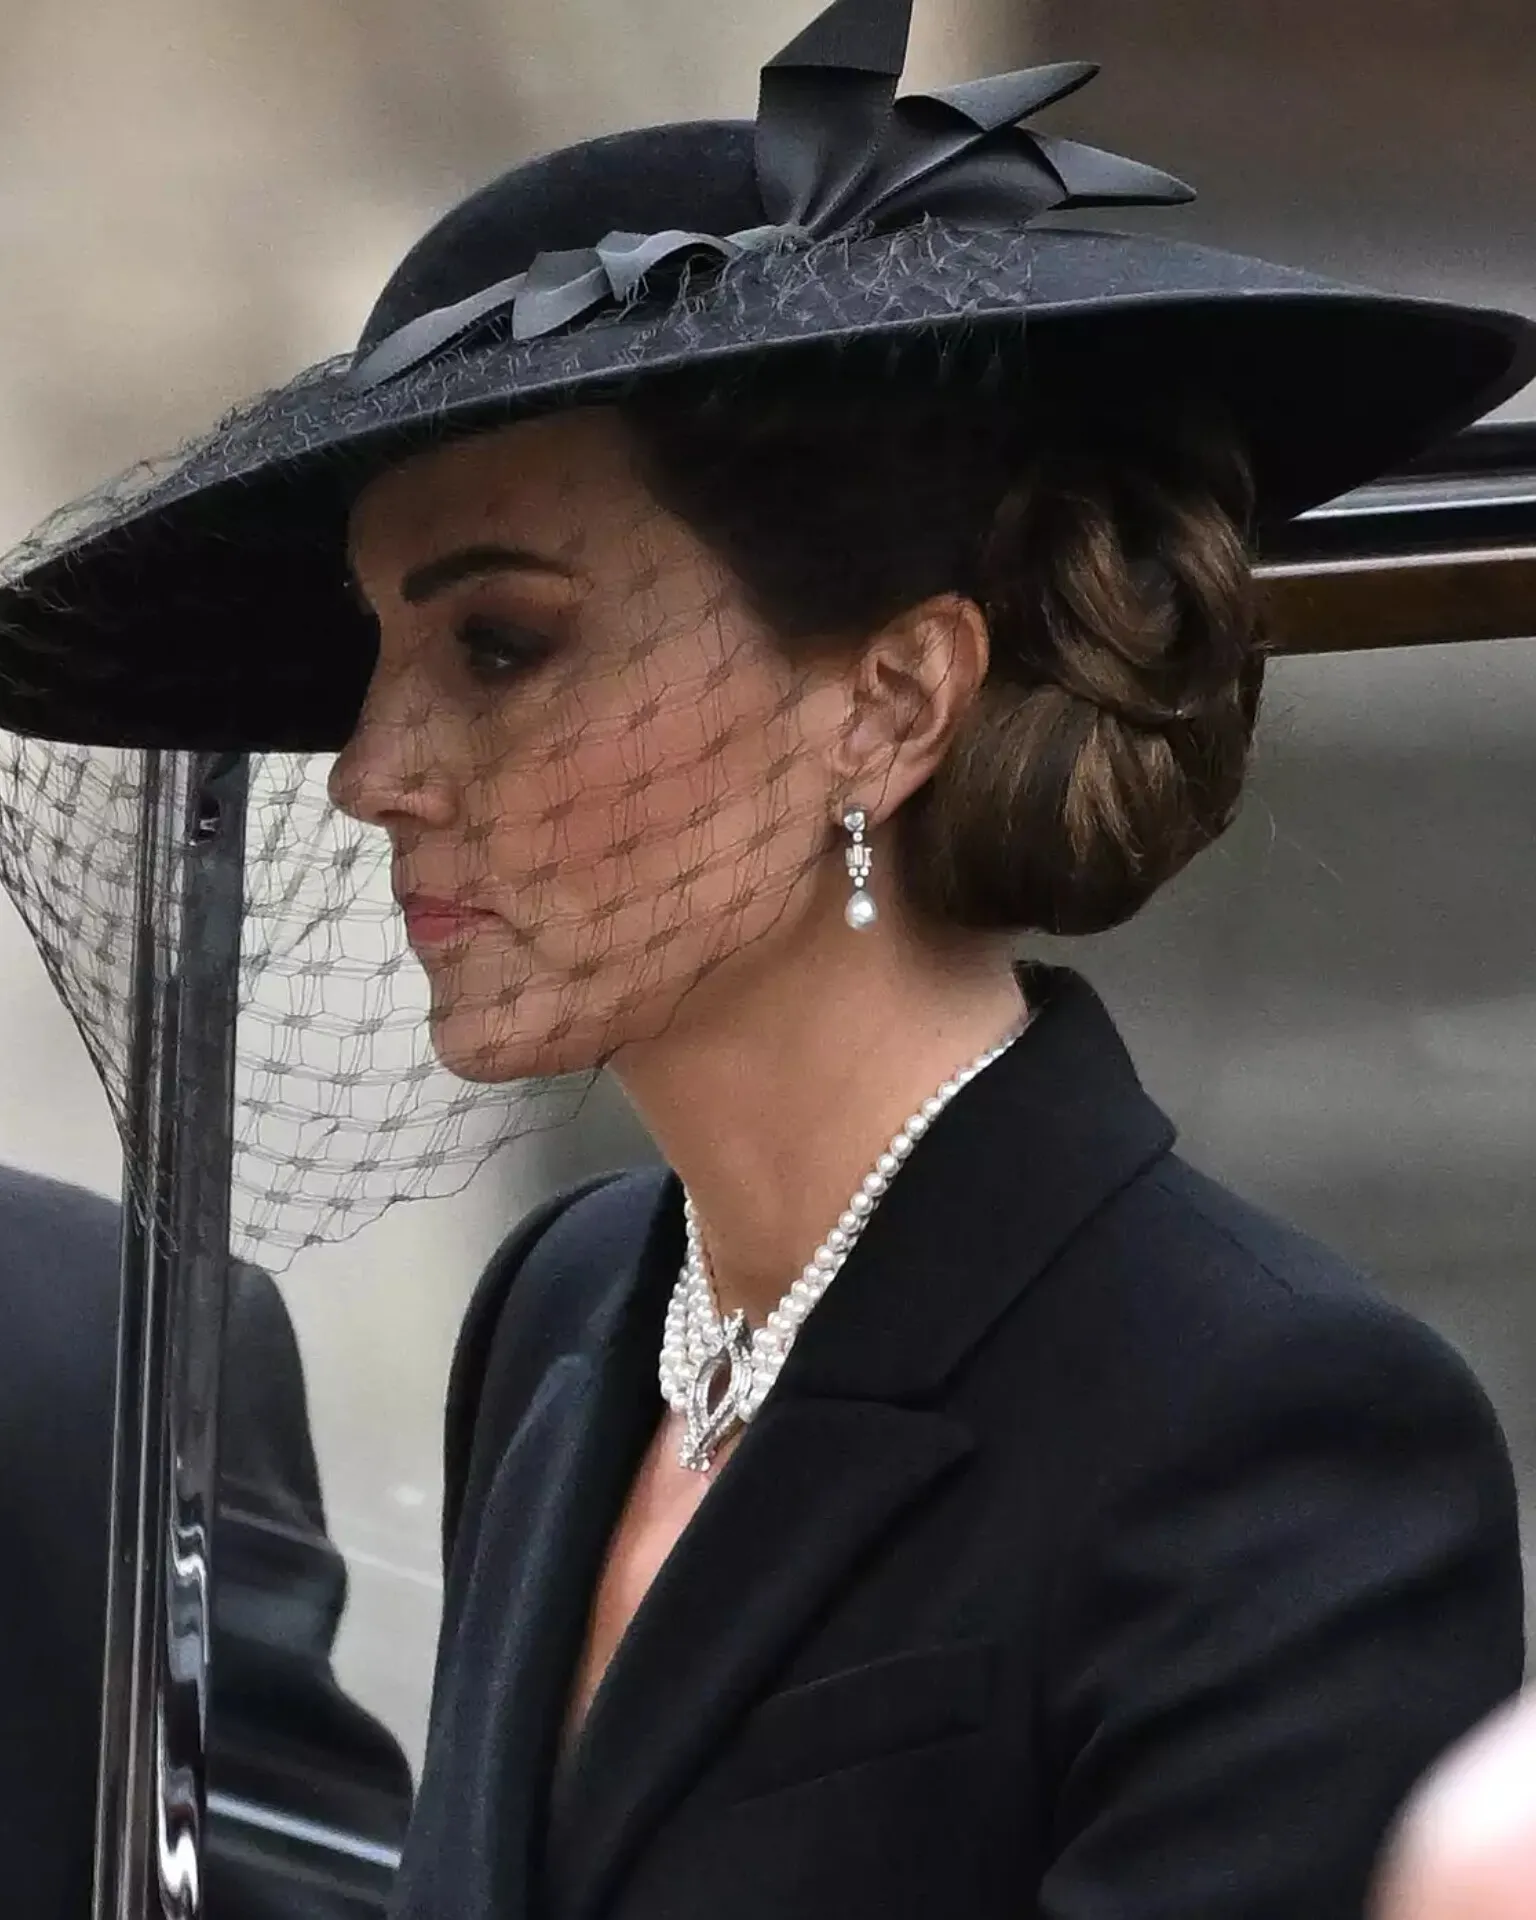 Disappearance of Kate Middleton